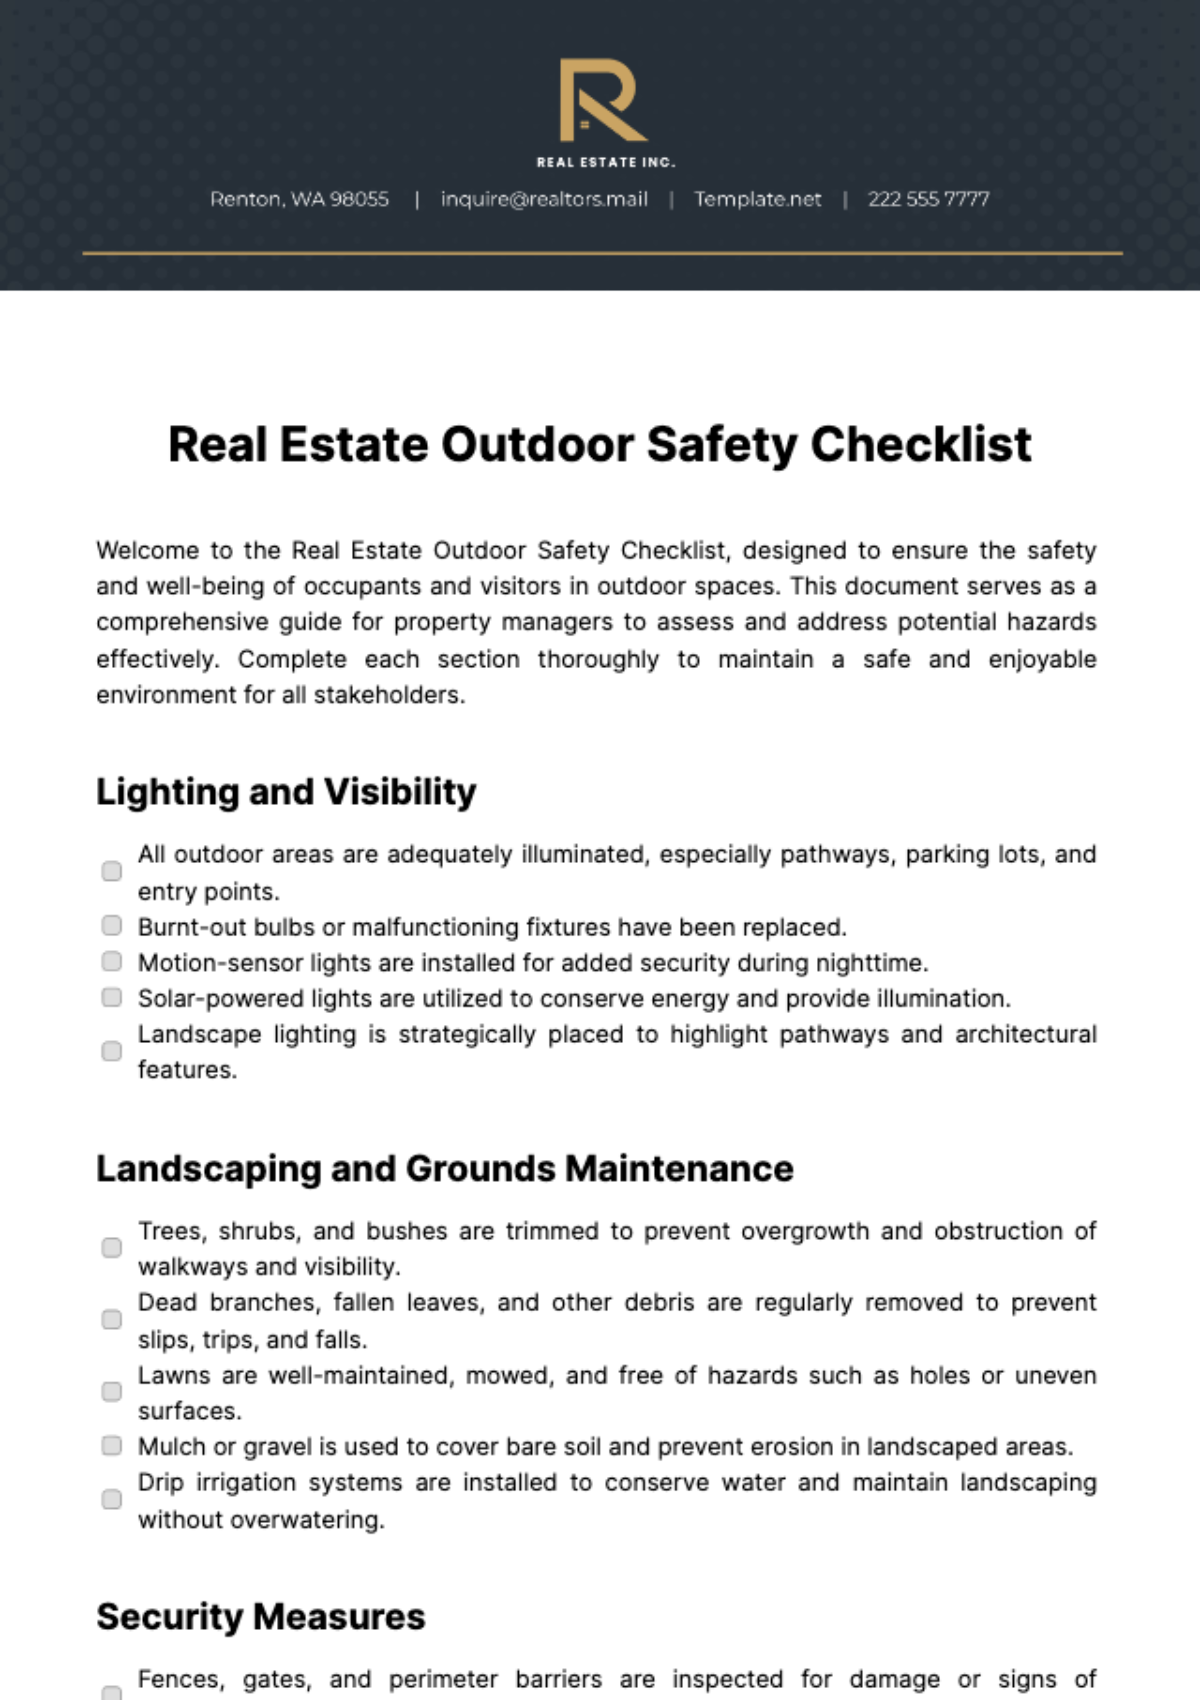 Real Estate Outdoor Safety Checklist Template